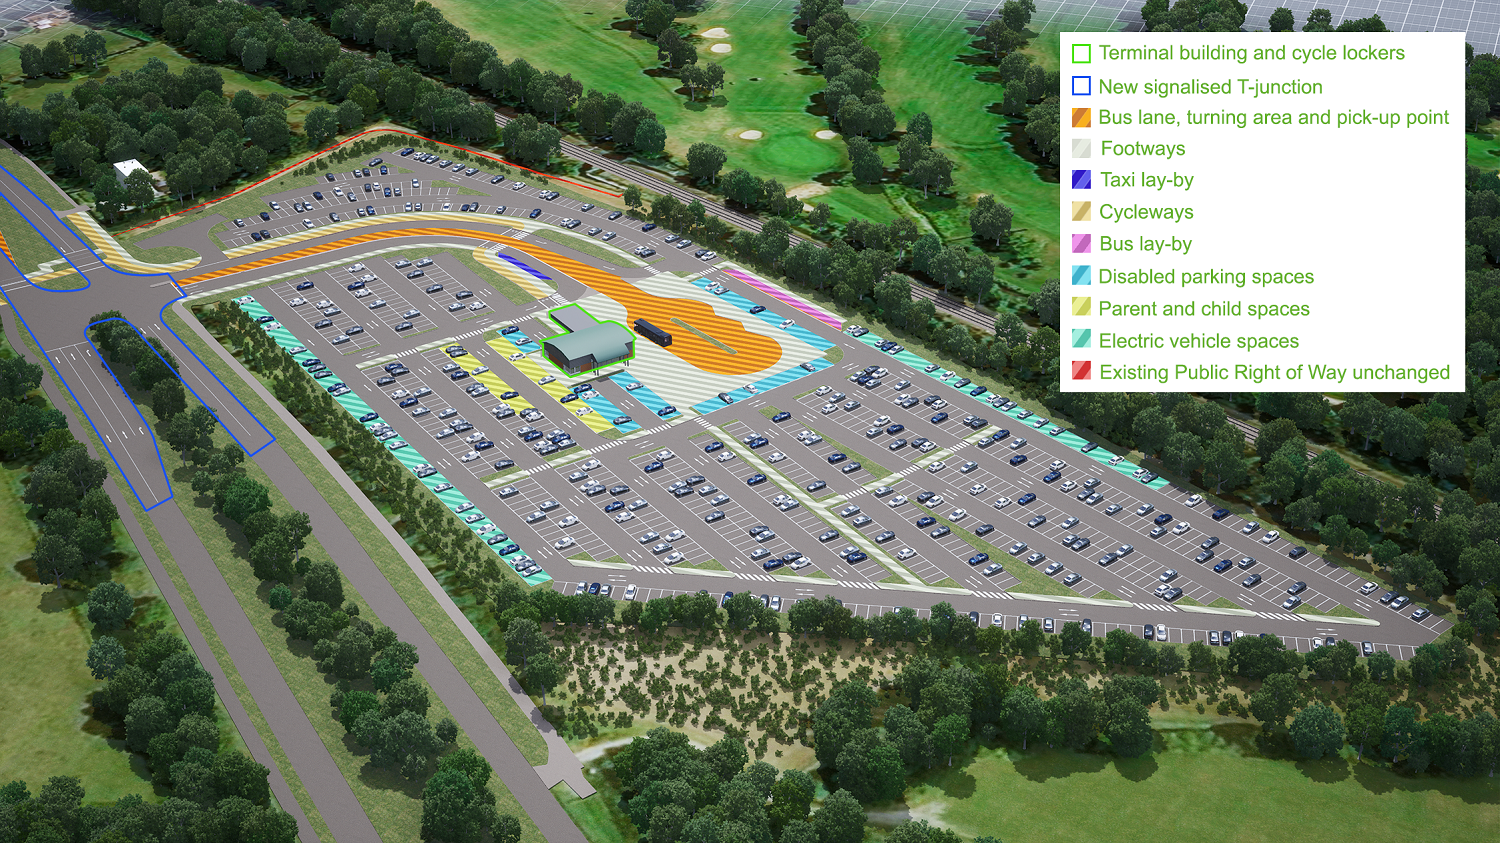 Image showing the layout of the Widford Park and Ride London Road option with a key